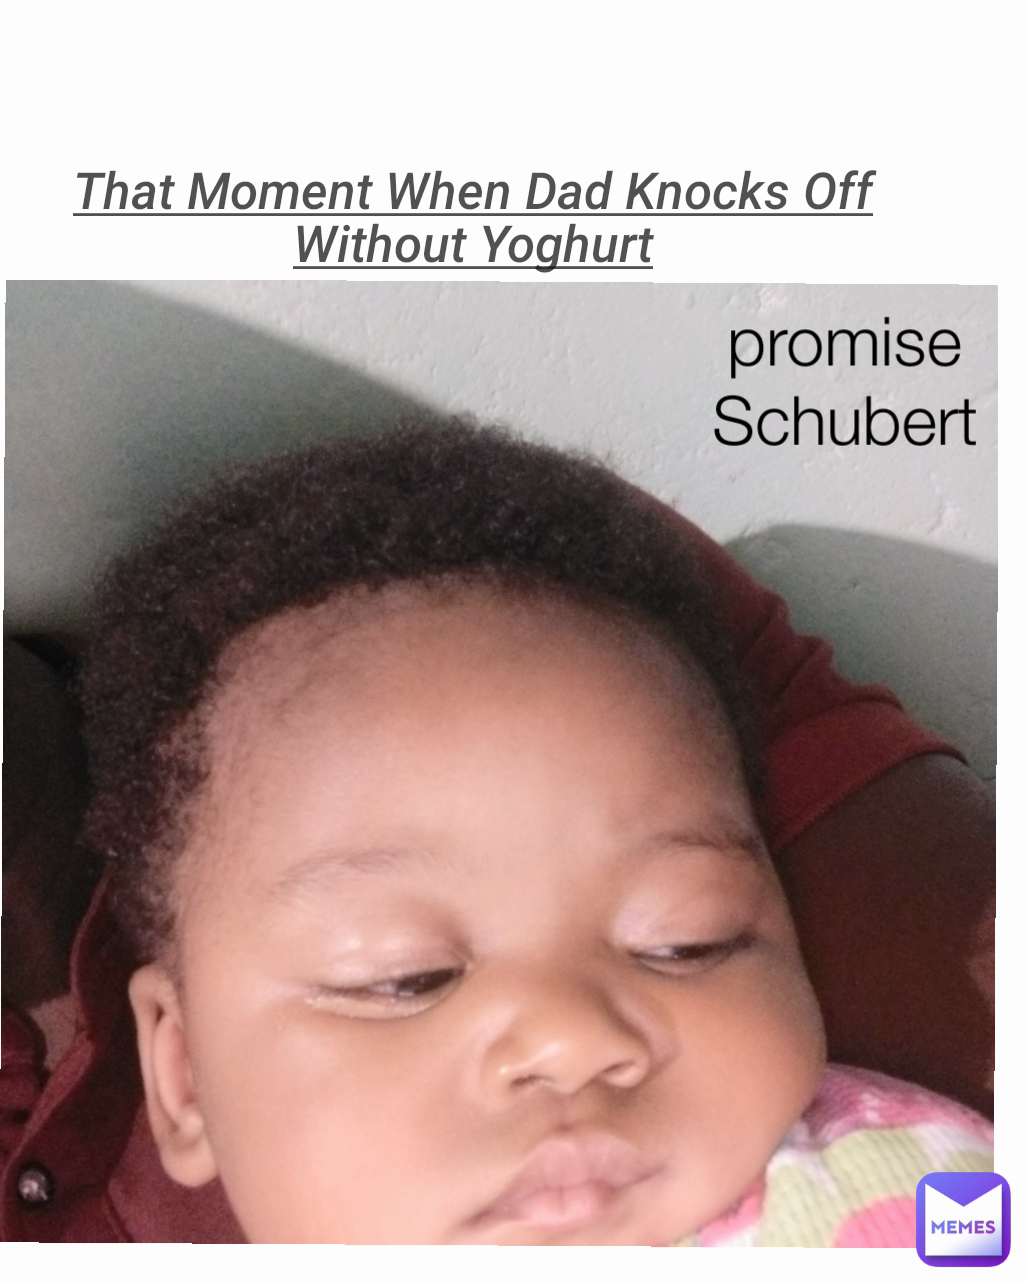 That Moment When Dad Knocks Off Without Yoghurt promise Schubert